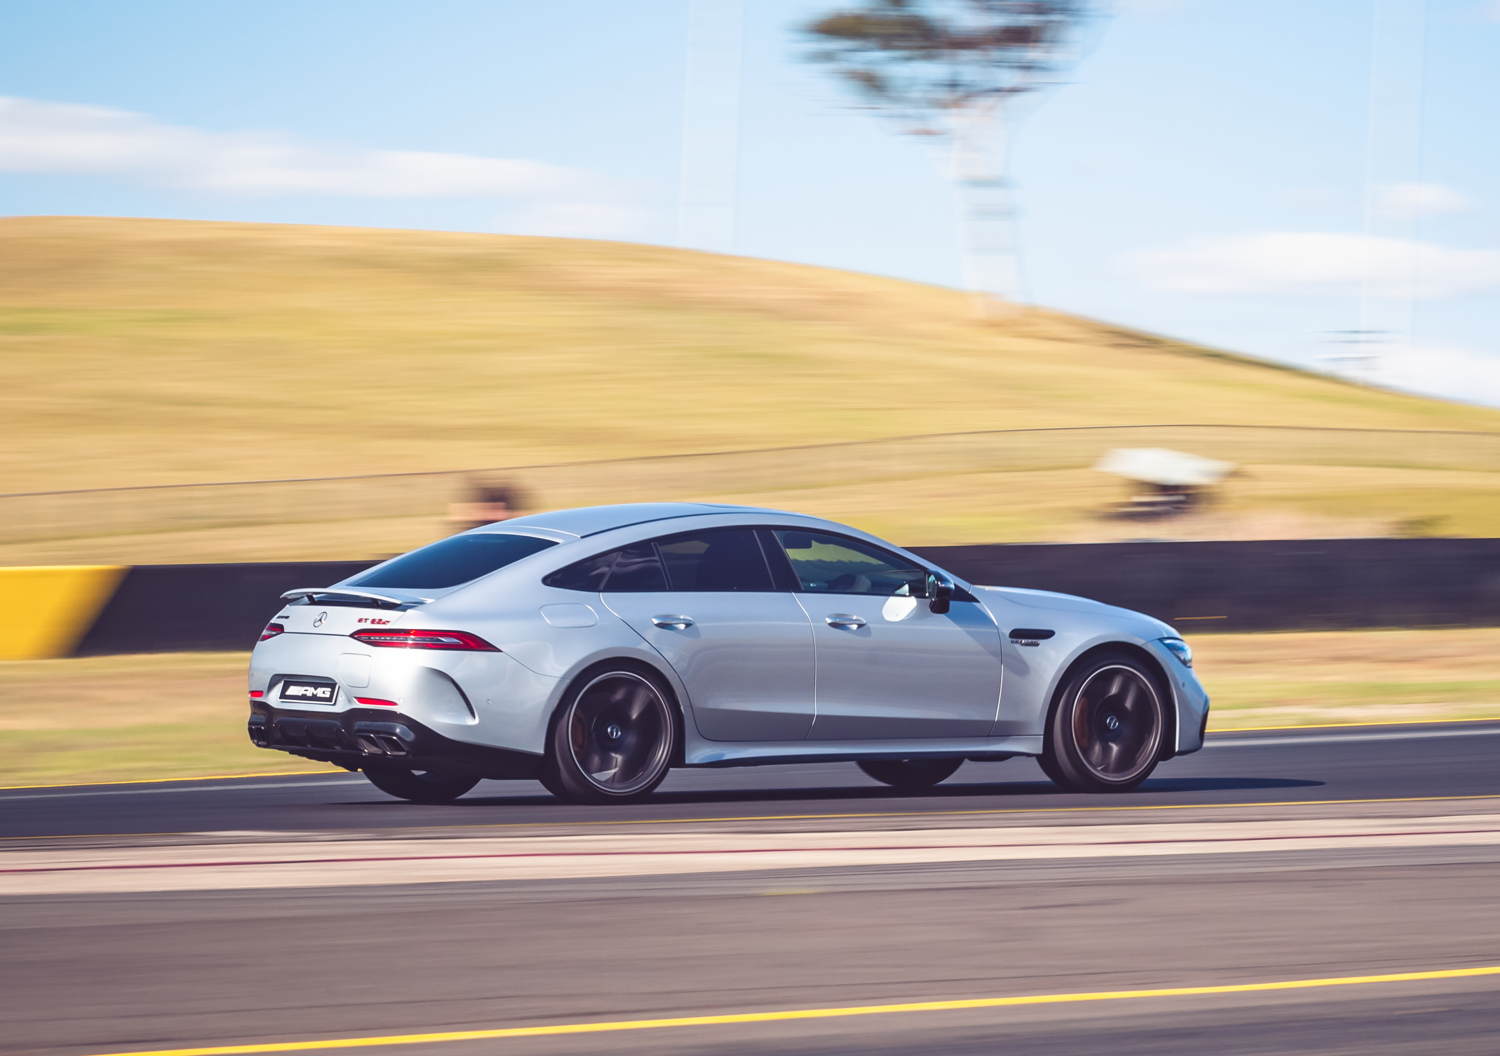 aria-label="Mercedes AMG GT 63 S Performance 7"